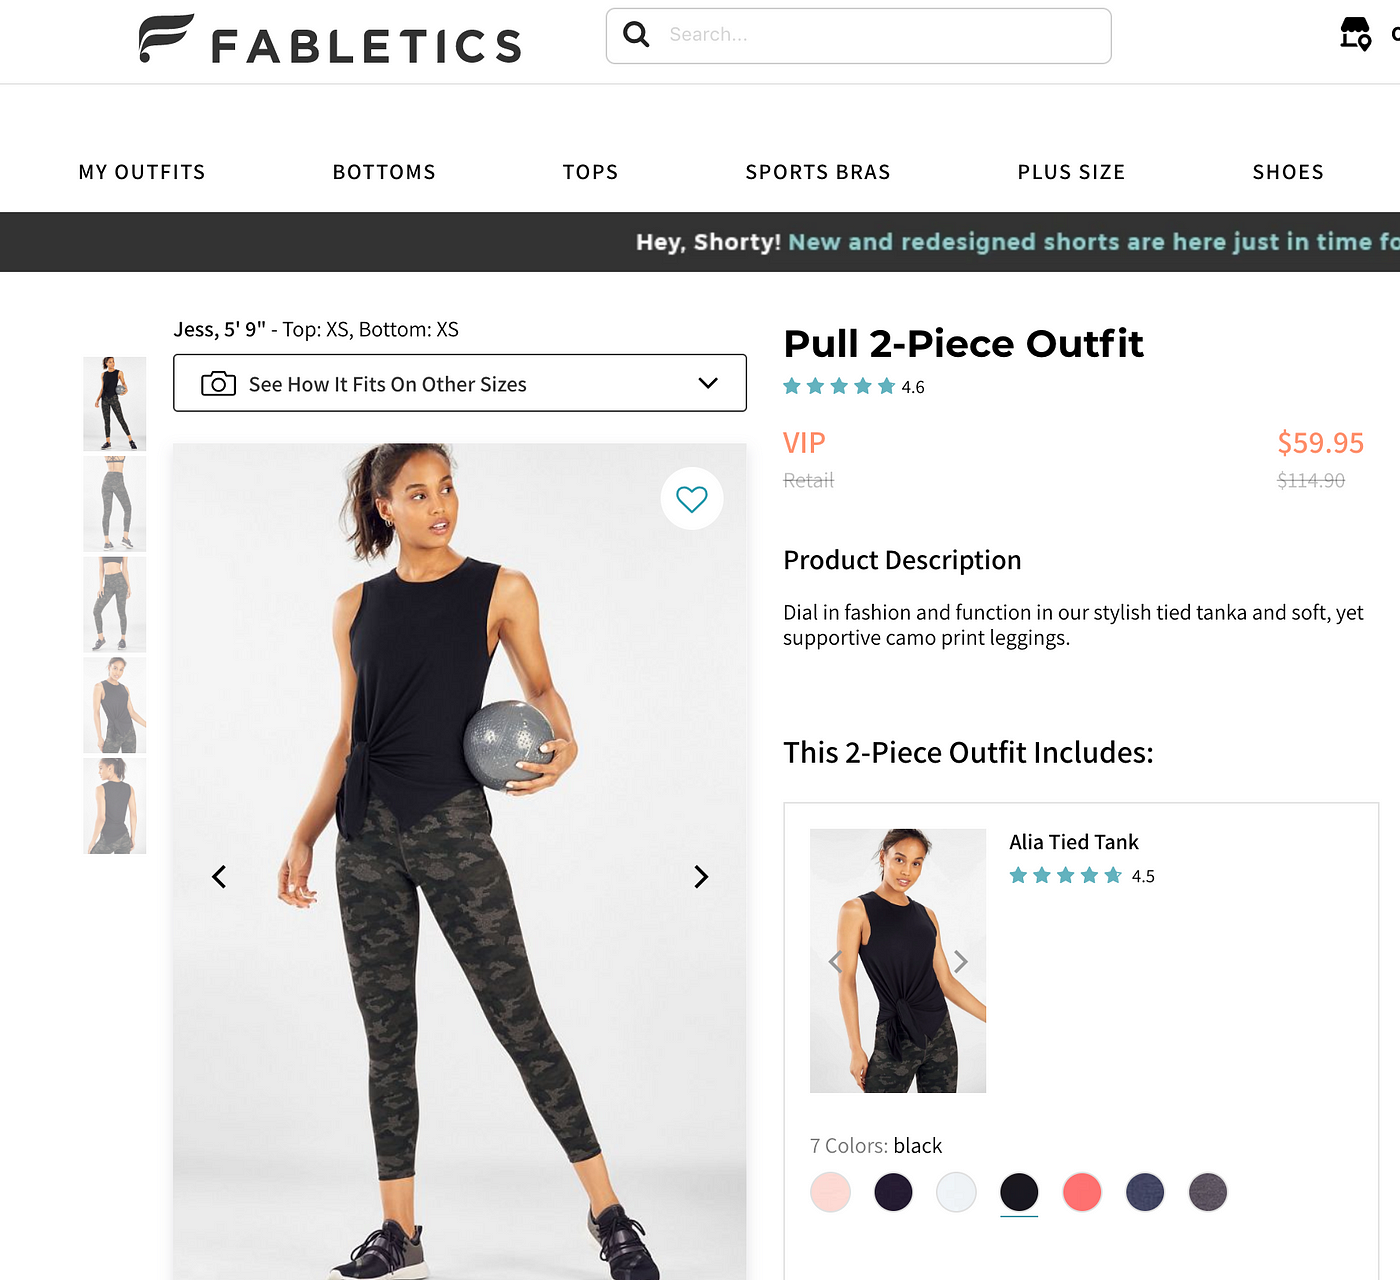 Fabletics and its dark patterns. Introducing dark patterns